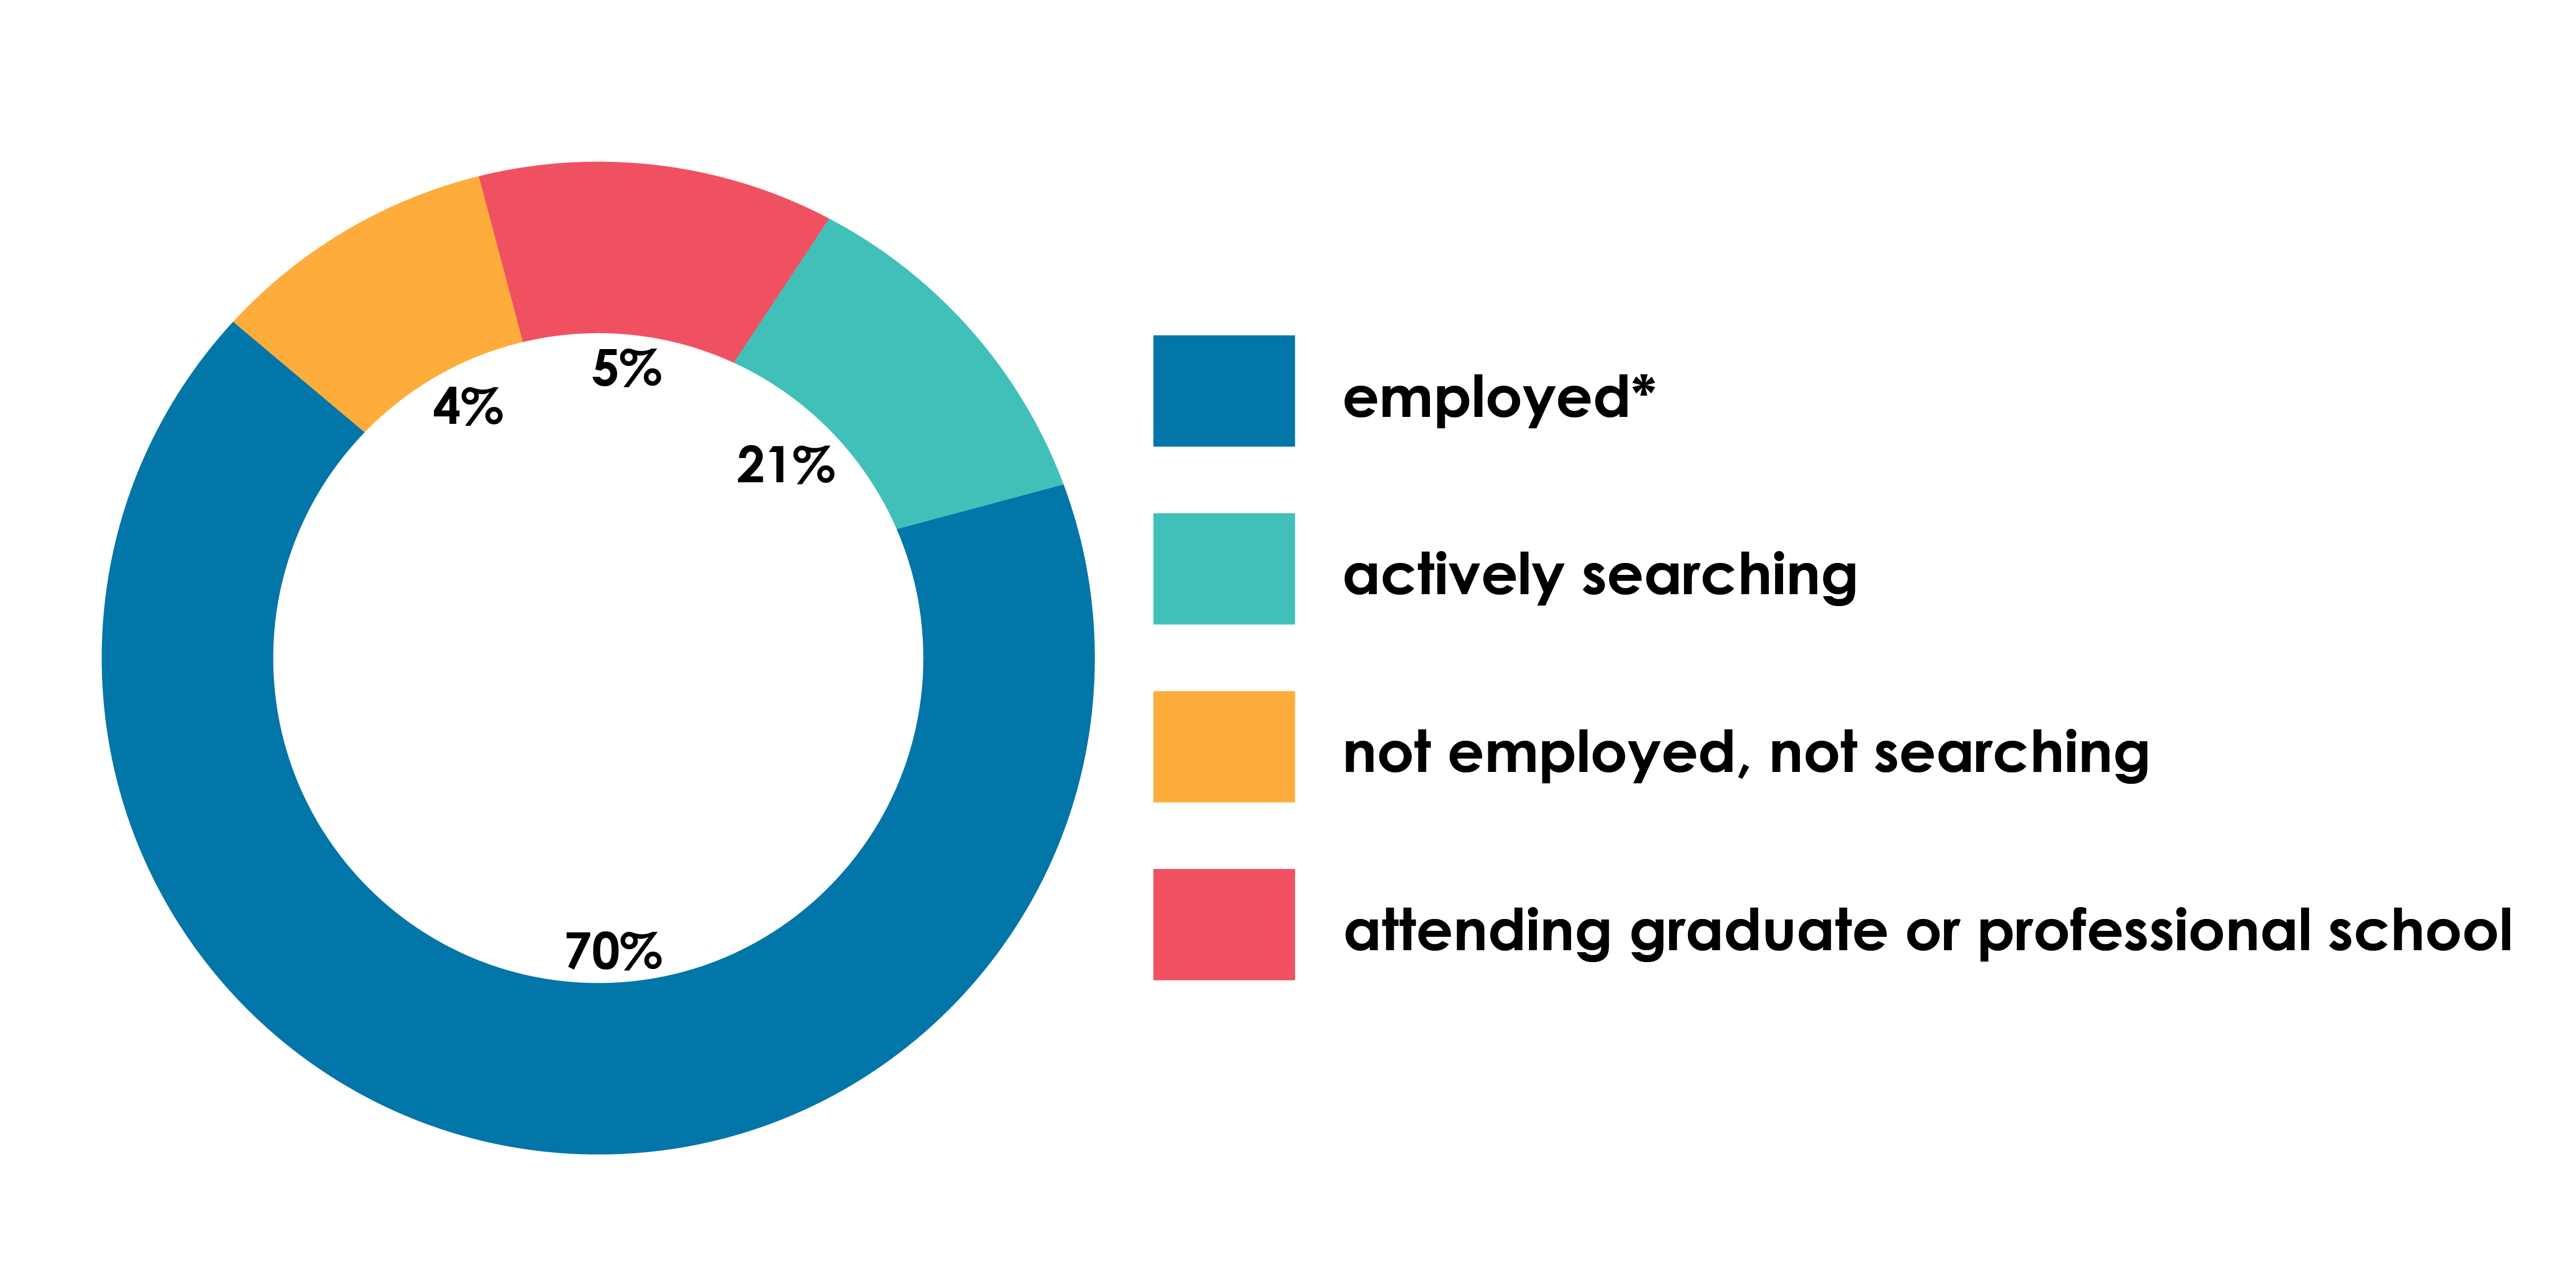 79% employed; 14% actively searching; 4% not employed; 3% attending graduate or professional school